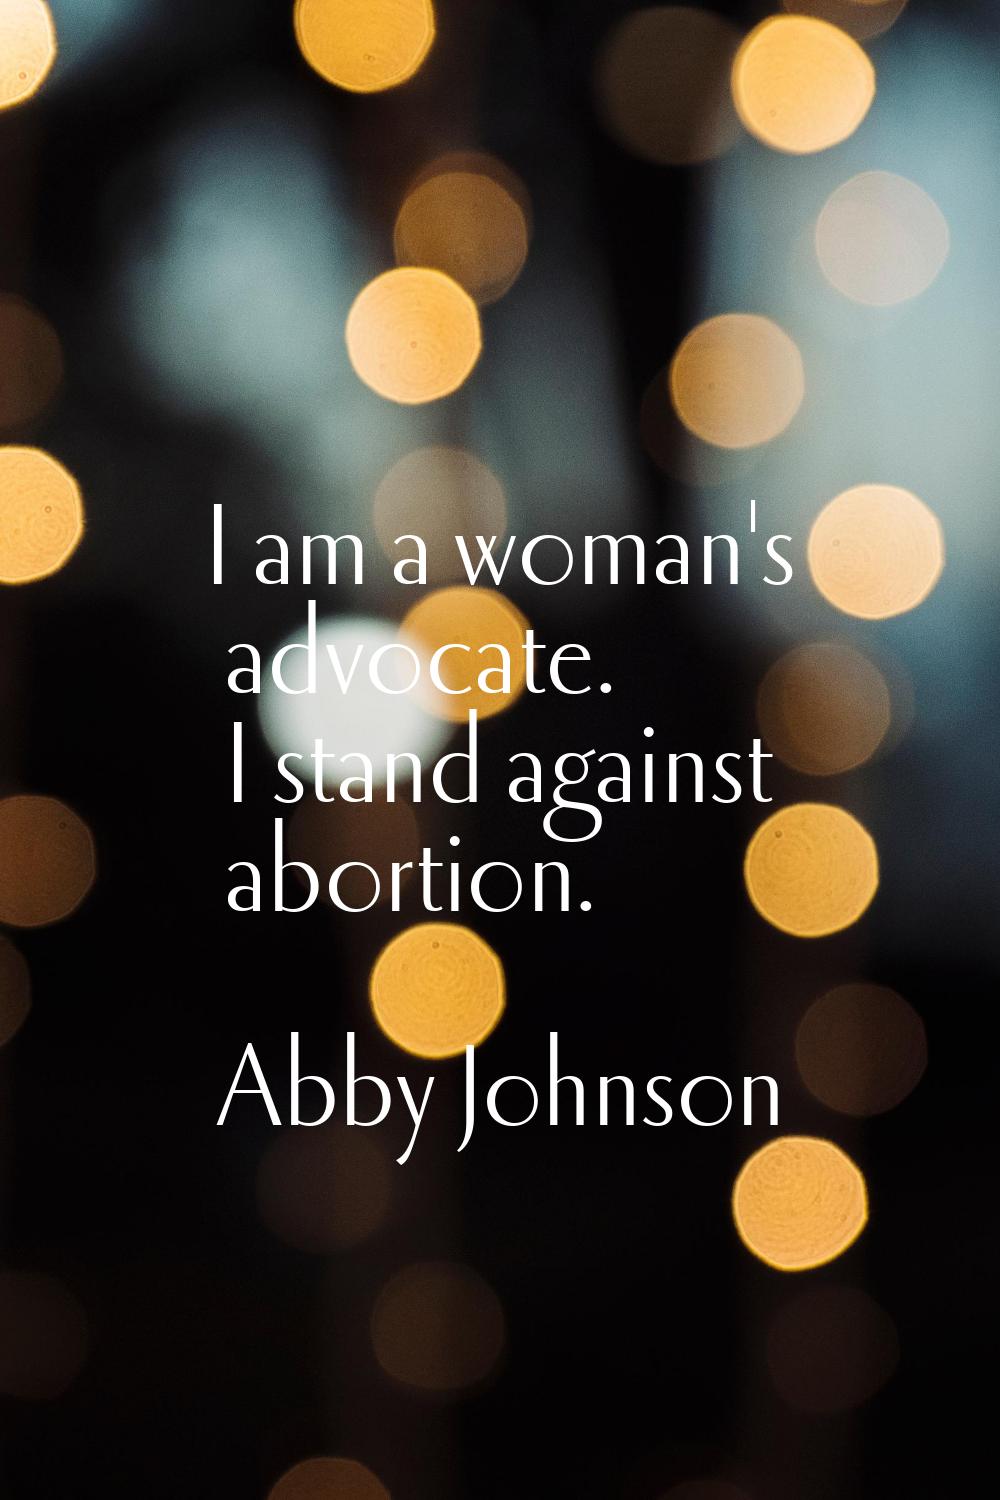 I am a woman's advocate. I stand against abortion.